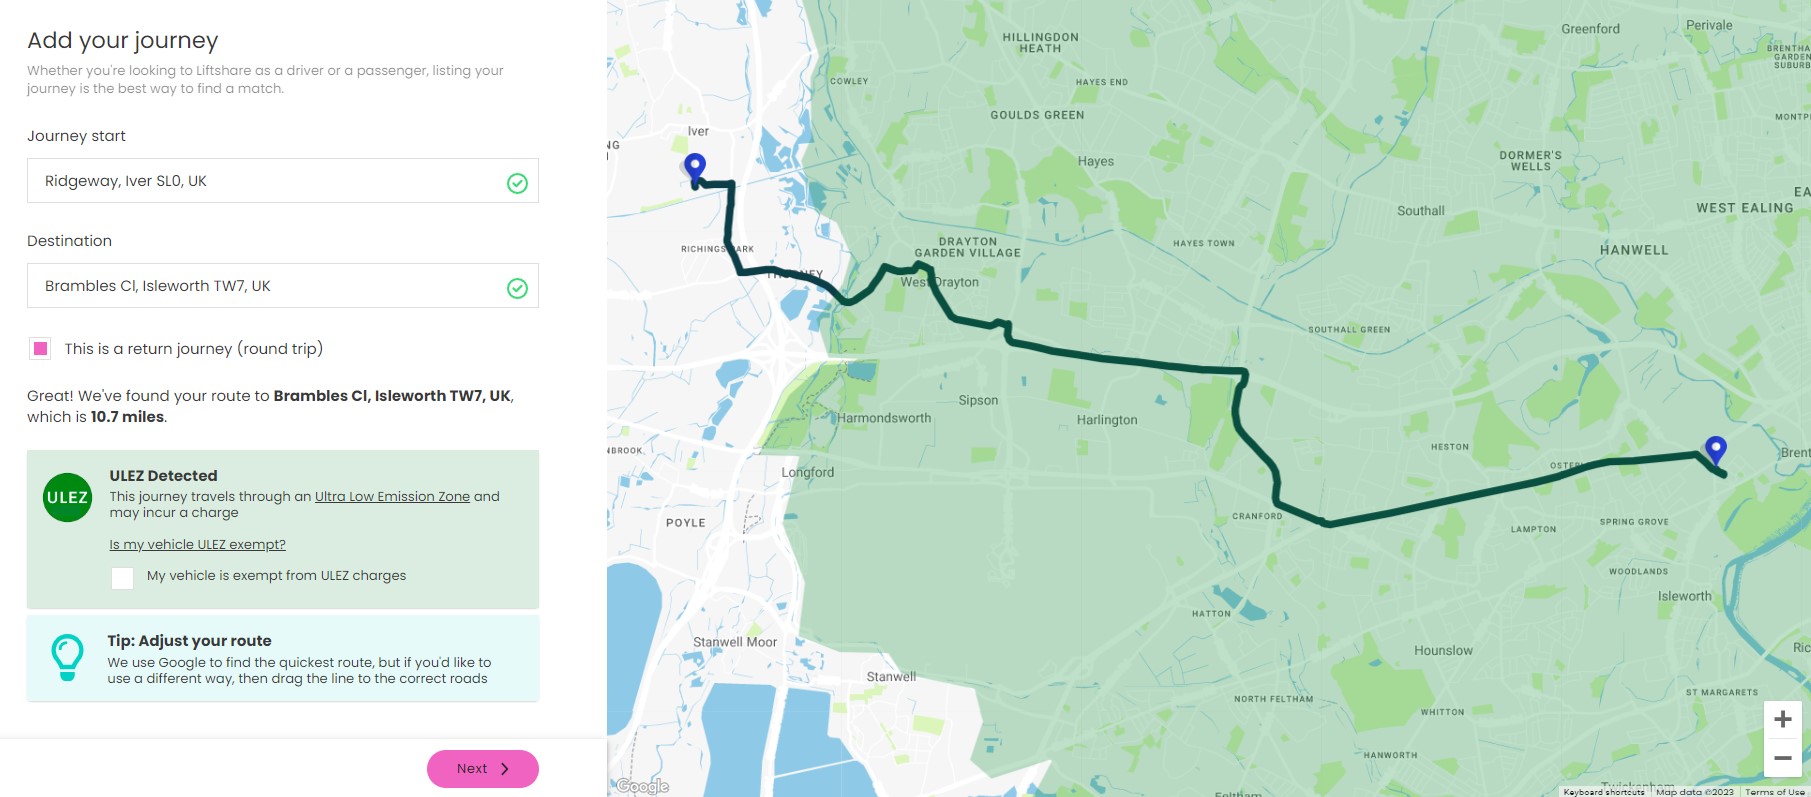 ULEZ detected - Add your journey map